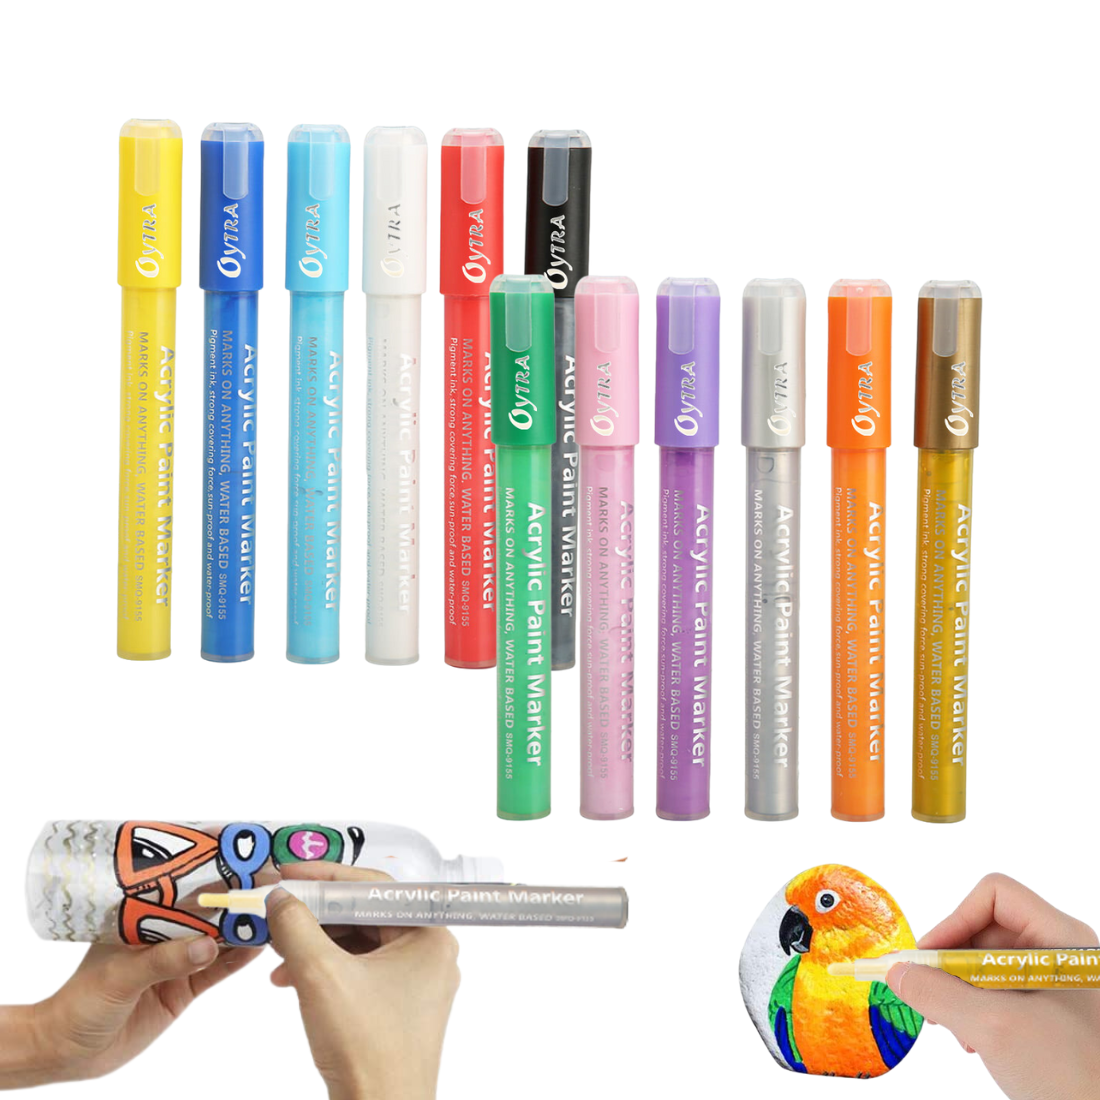 Acrylic Markers Regular colors in Pack of 10pcs